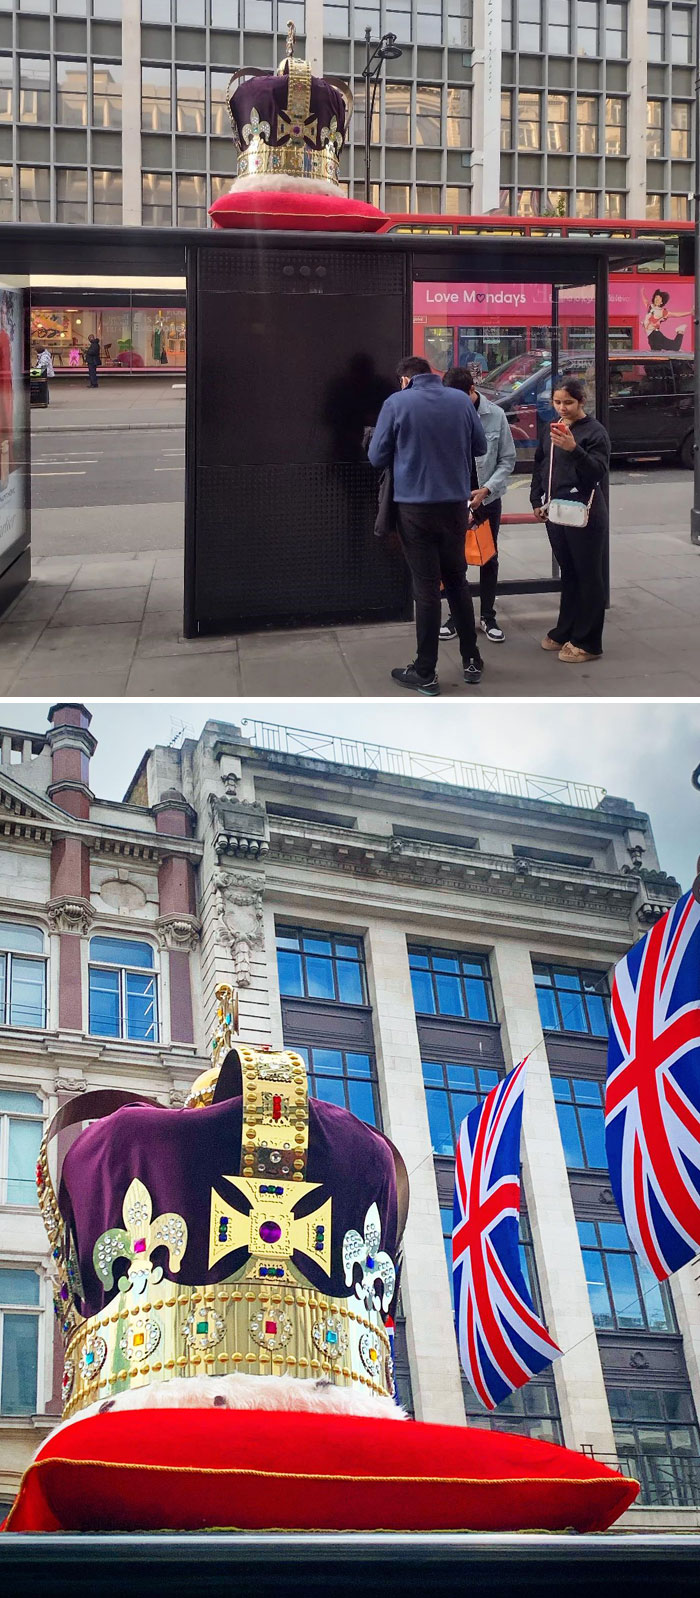 Large Replicas Of King Charles's Crown Have Appeared On Top Of Three Bus Stops Along Oxford Street In Celebration Of The King Charles III Coronation